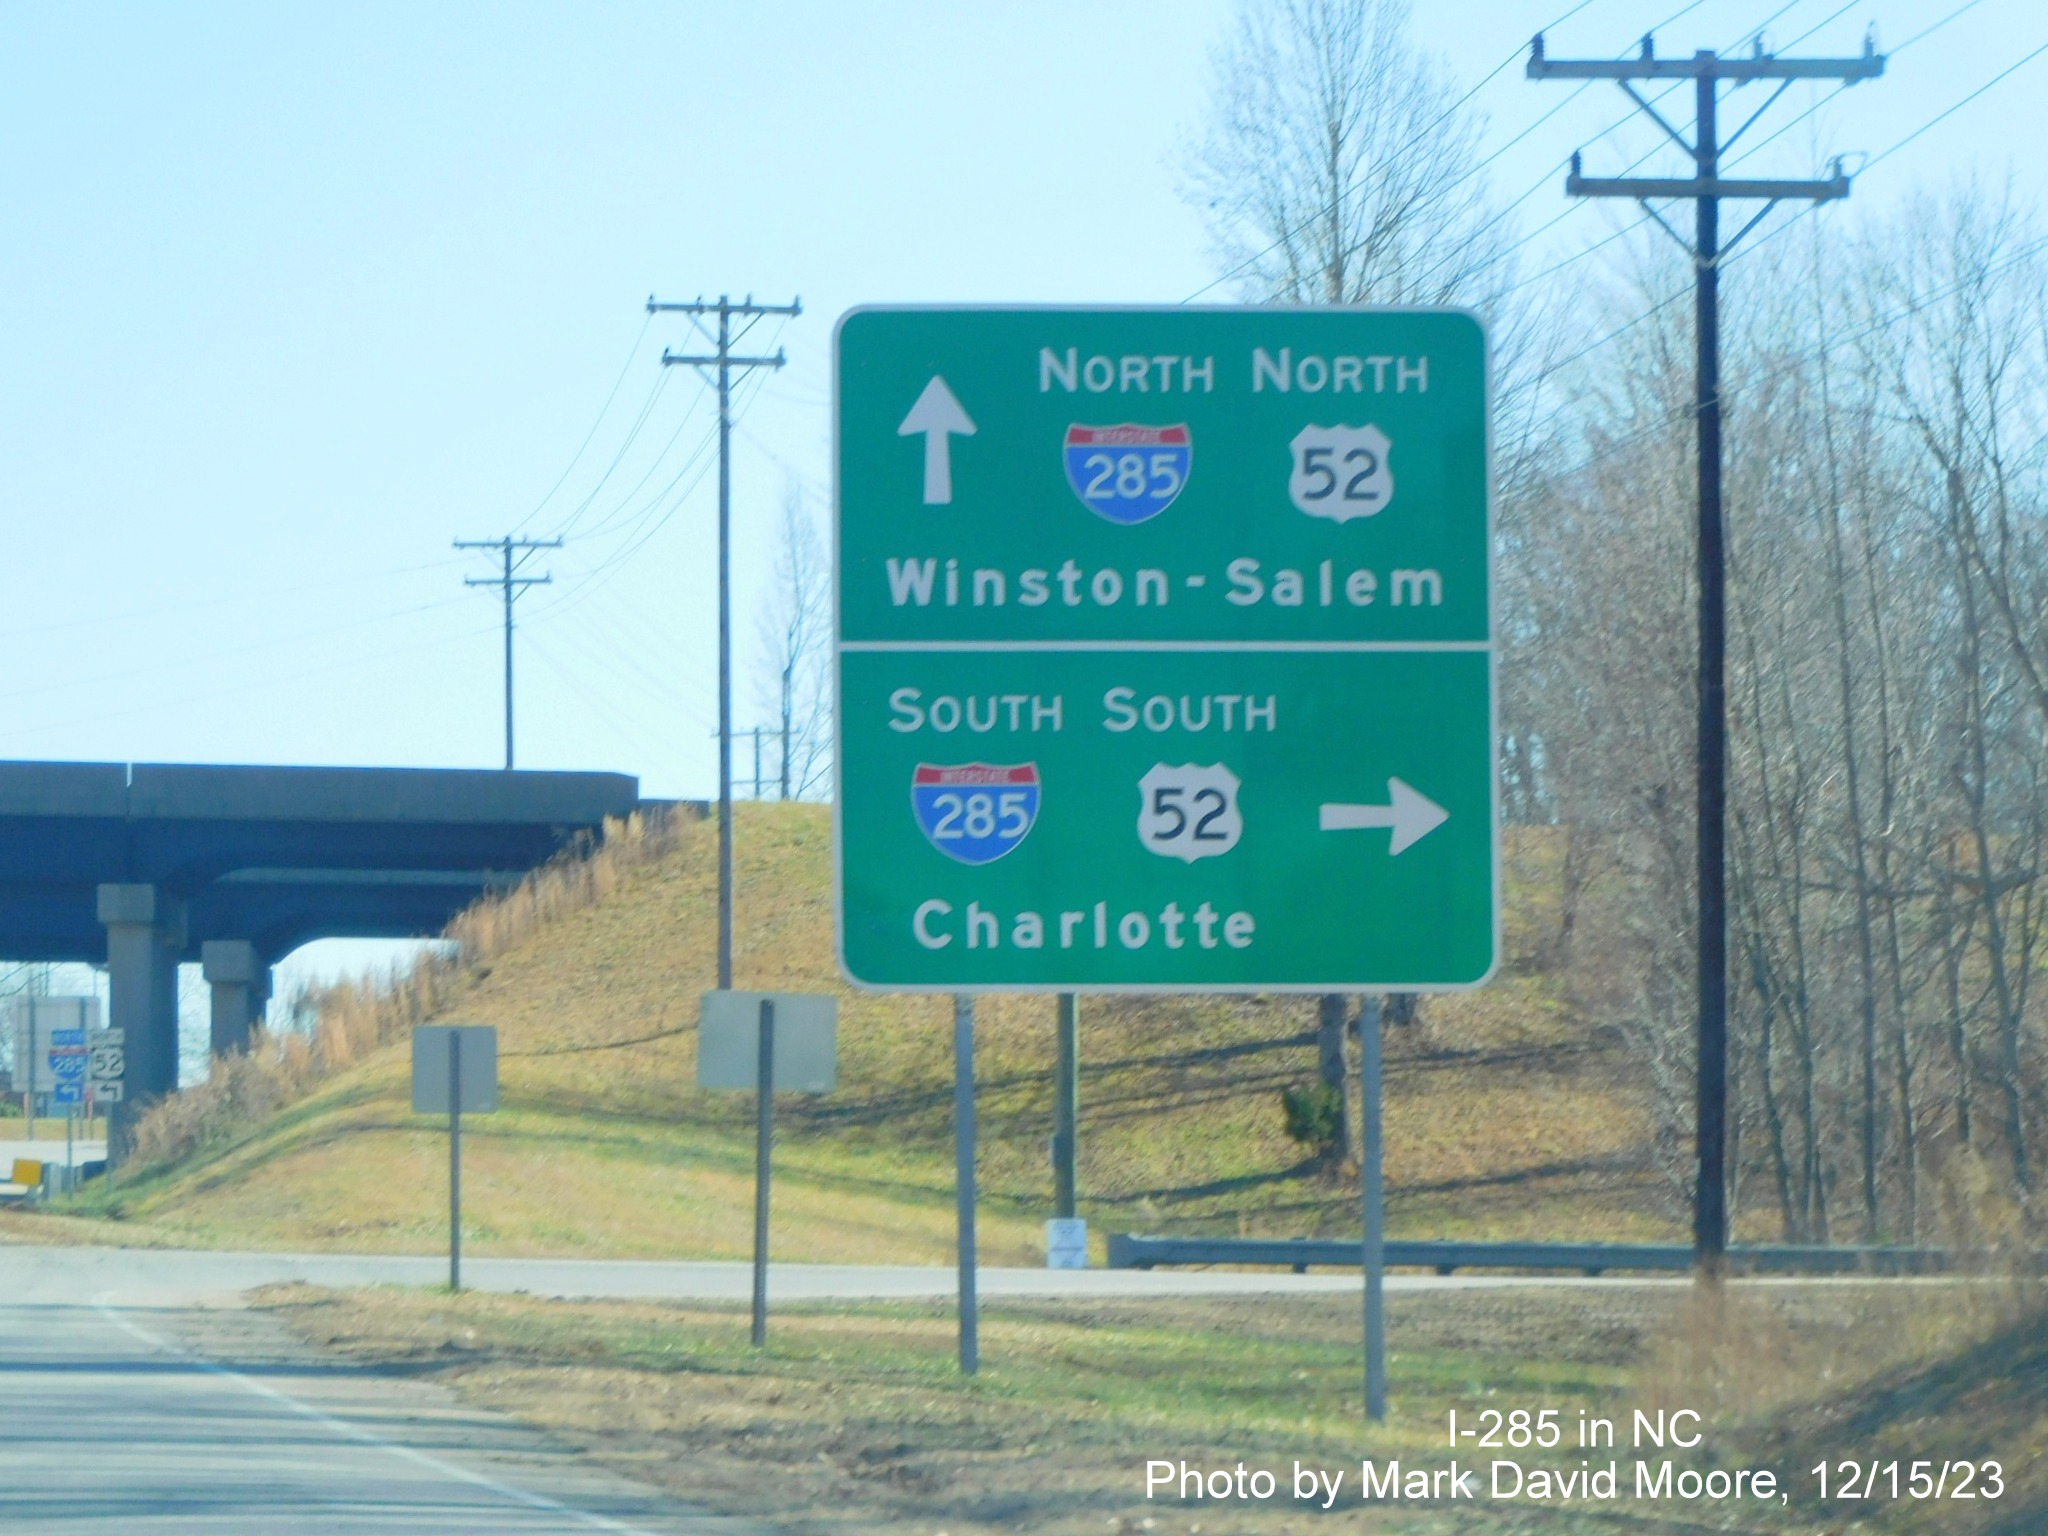 Image of South I-285/US 52 ramp signage on US 64 in Lexington, Google Maps Street View image, July 2022